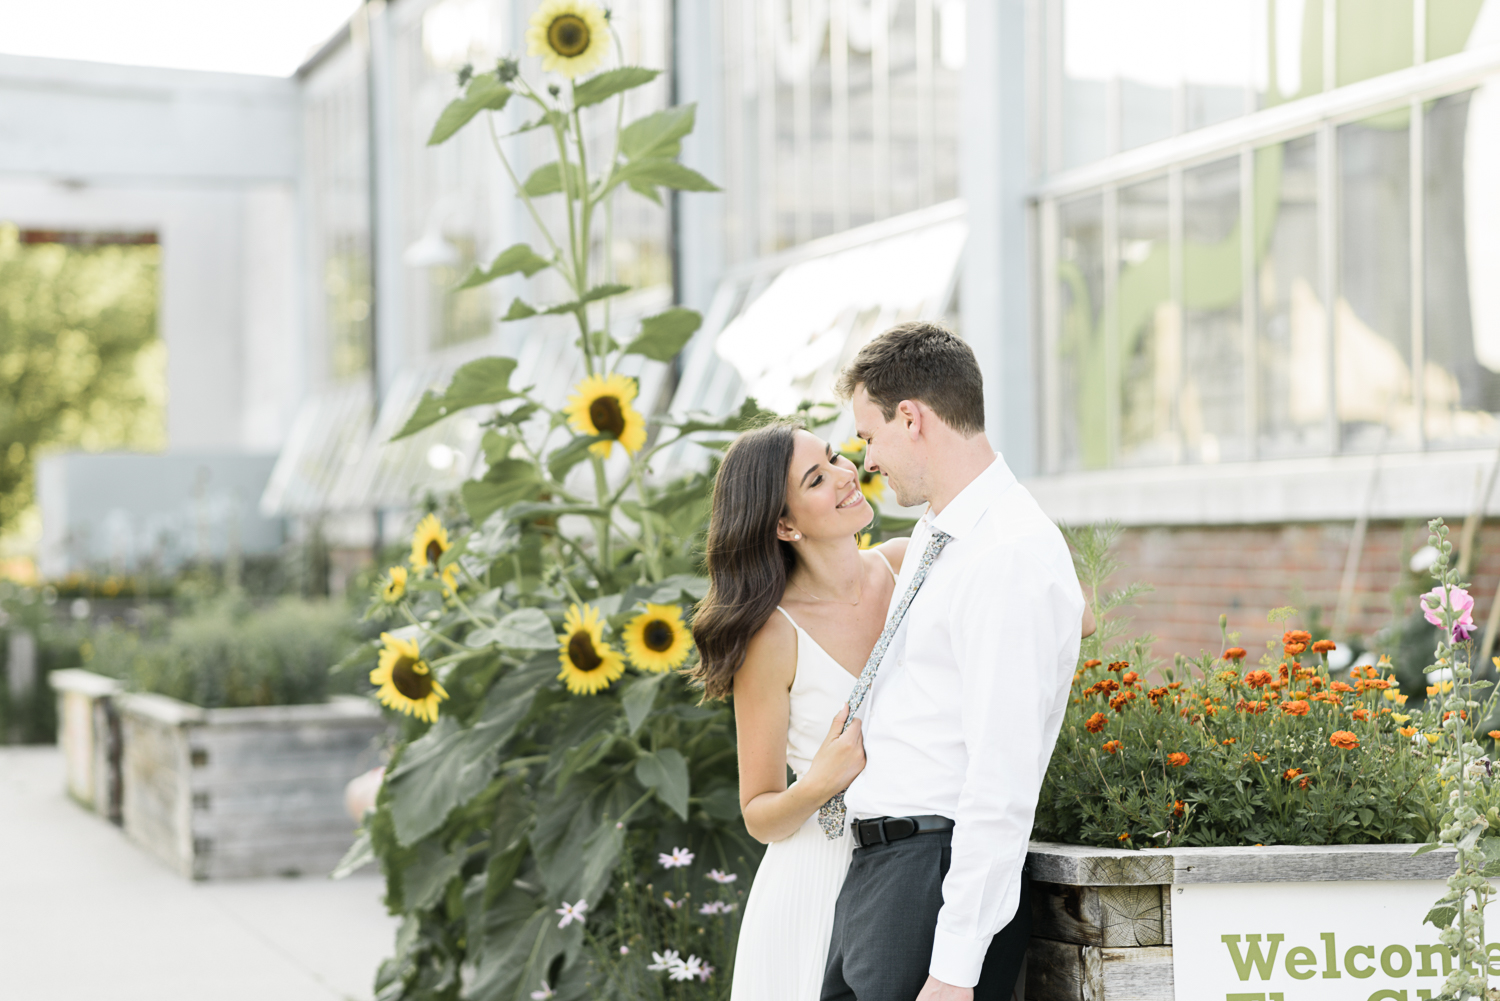 Couple in white shirt and white dress with sunflowers for their engagement shoot